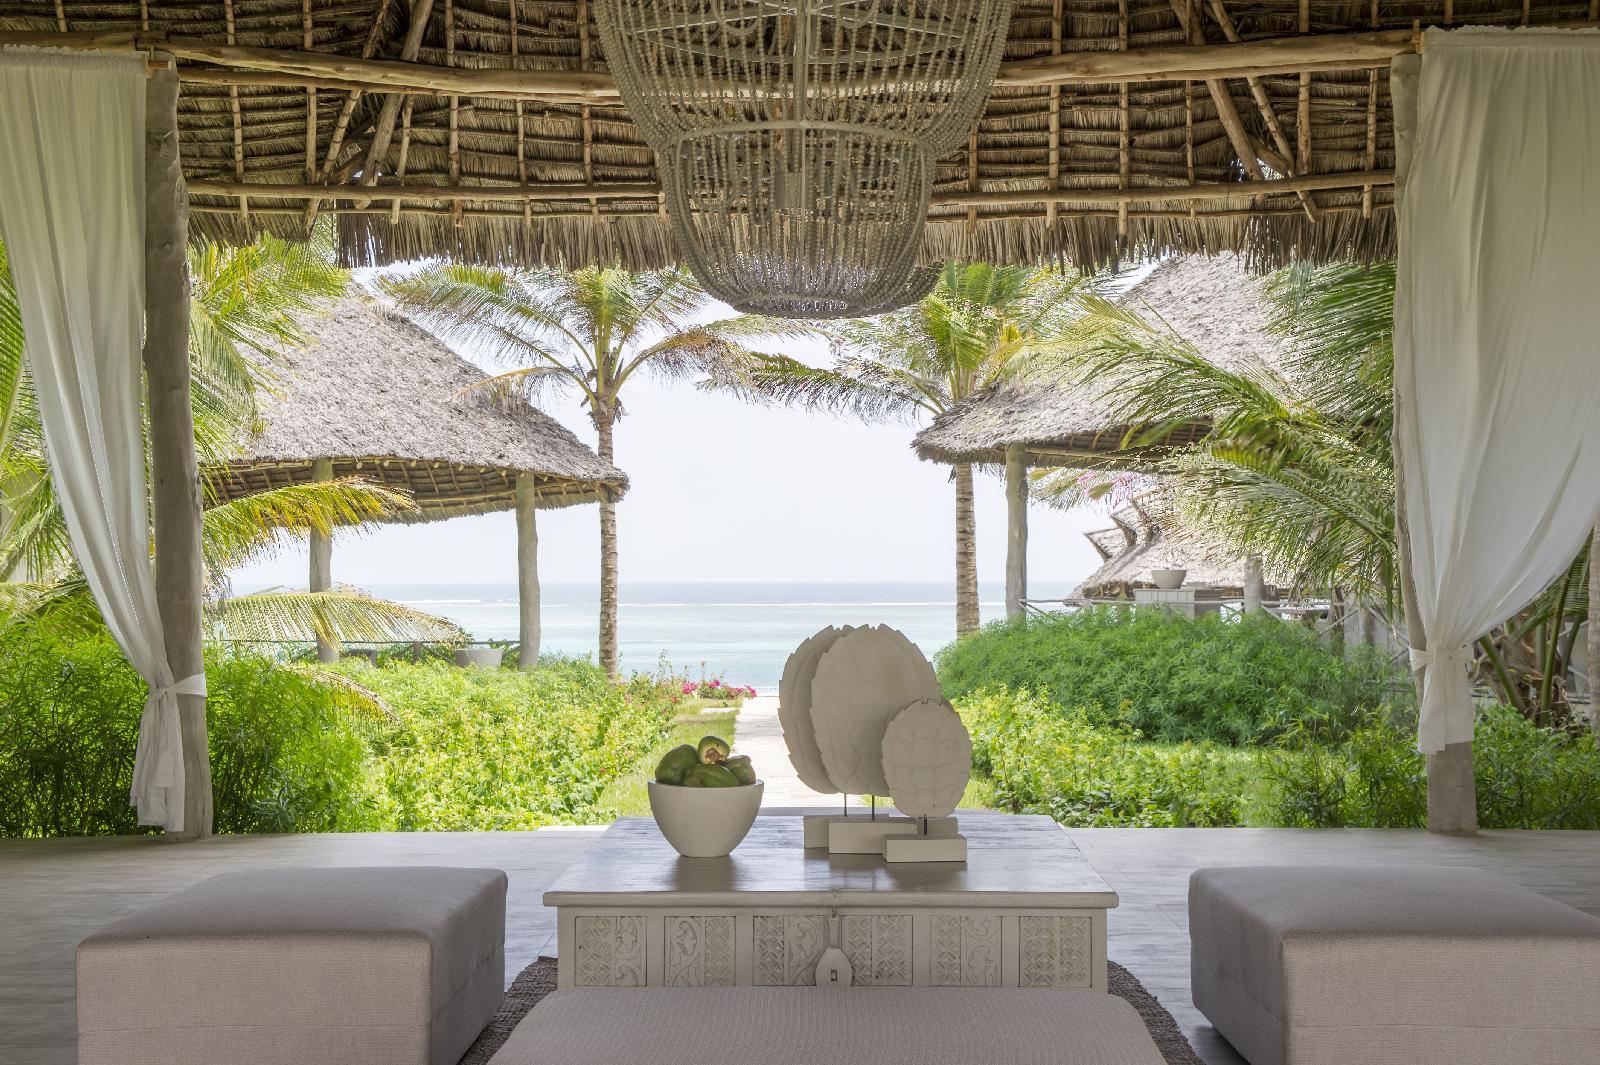 the reception with view over the ocean of the sun deck with a view over the beach at Zawadi, Tanzania